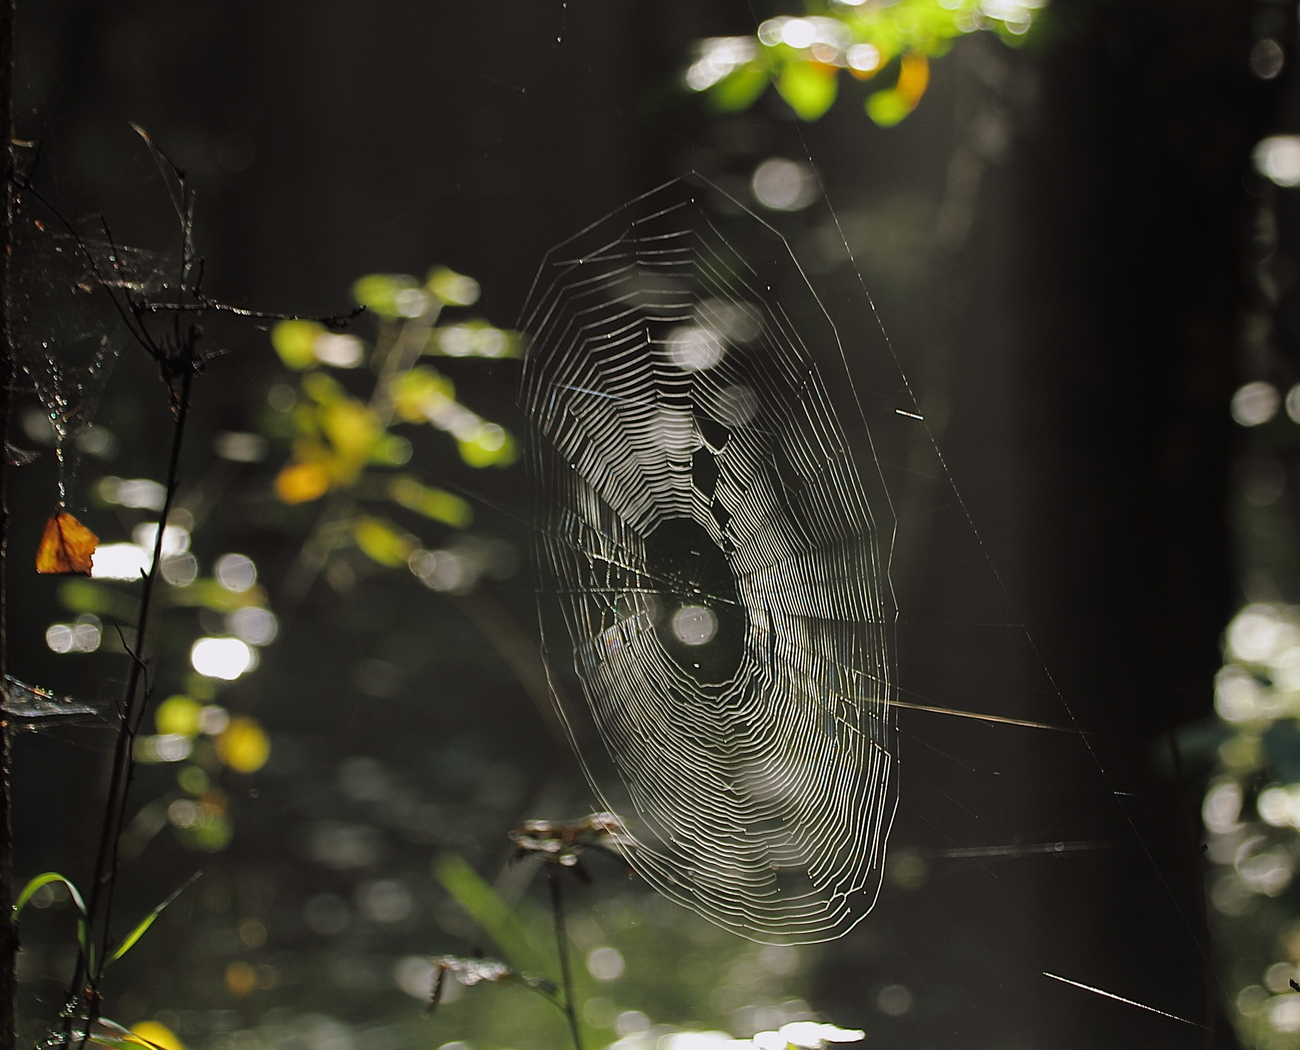 Photos of the web. Light through the web, in the August forest